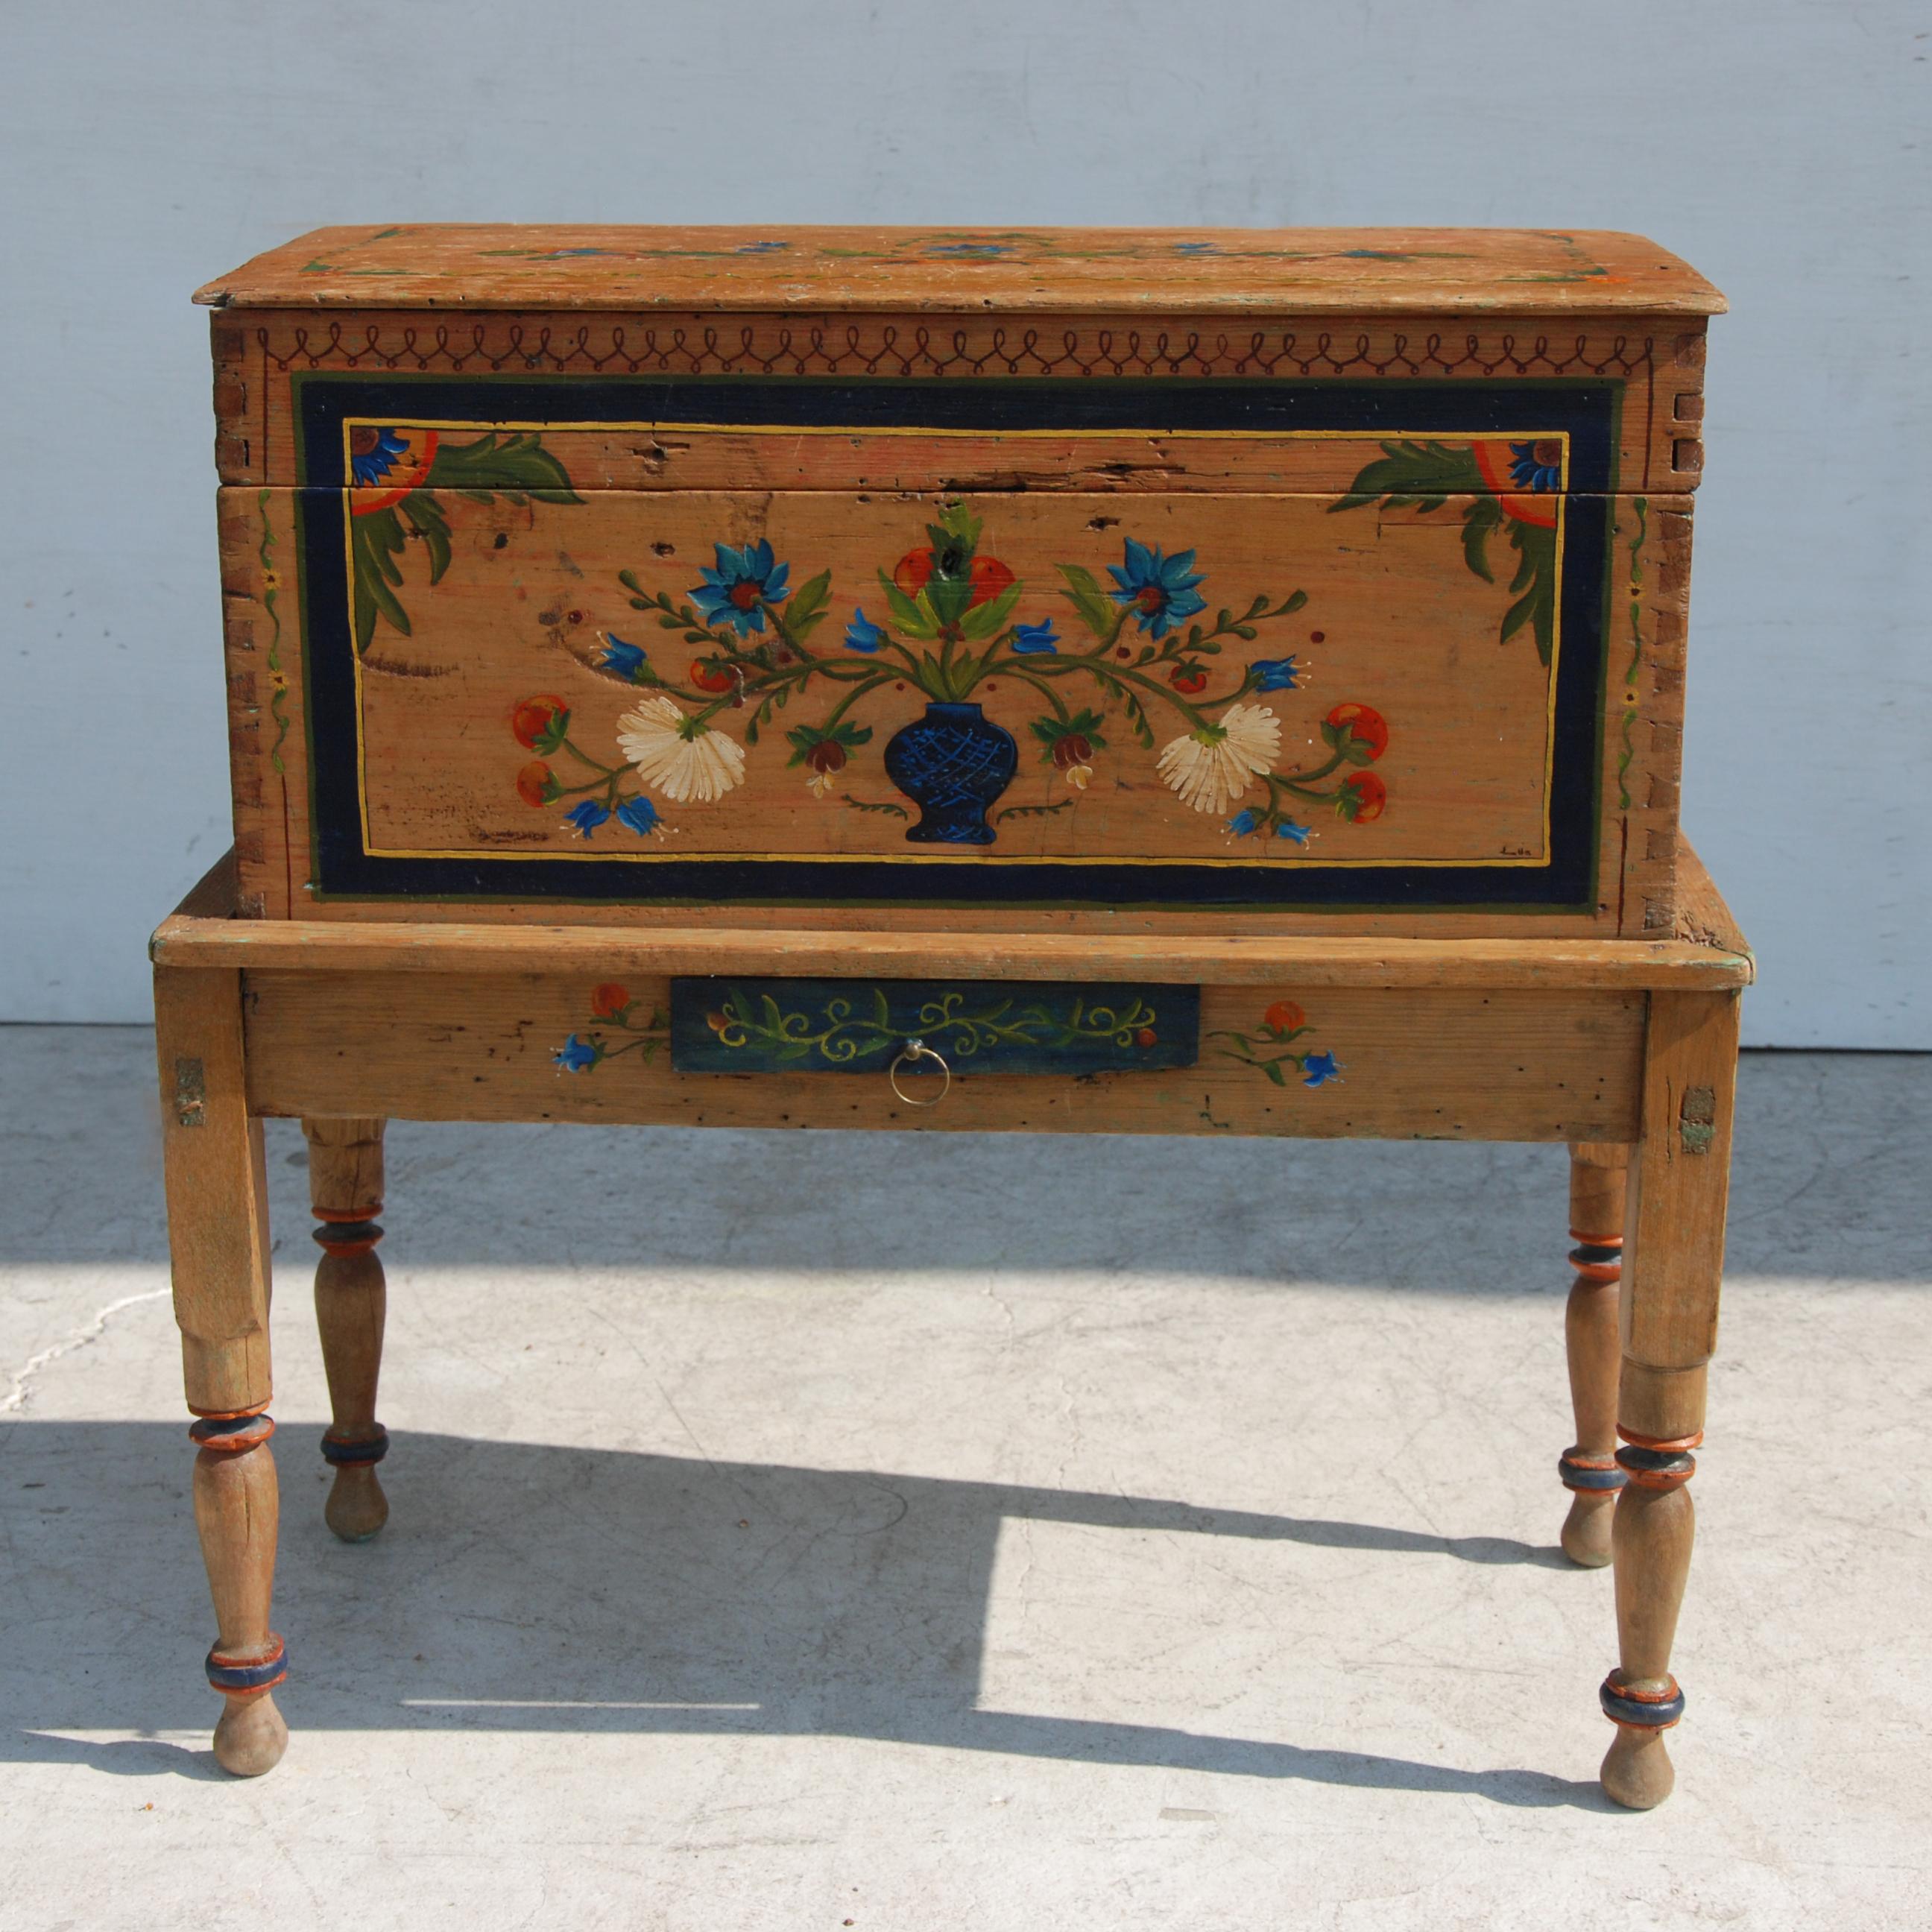 Rustic Antique, Hand Painted Mexican Wedding or Hope Chest on Stand